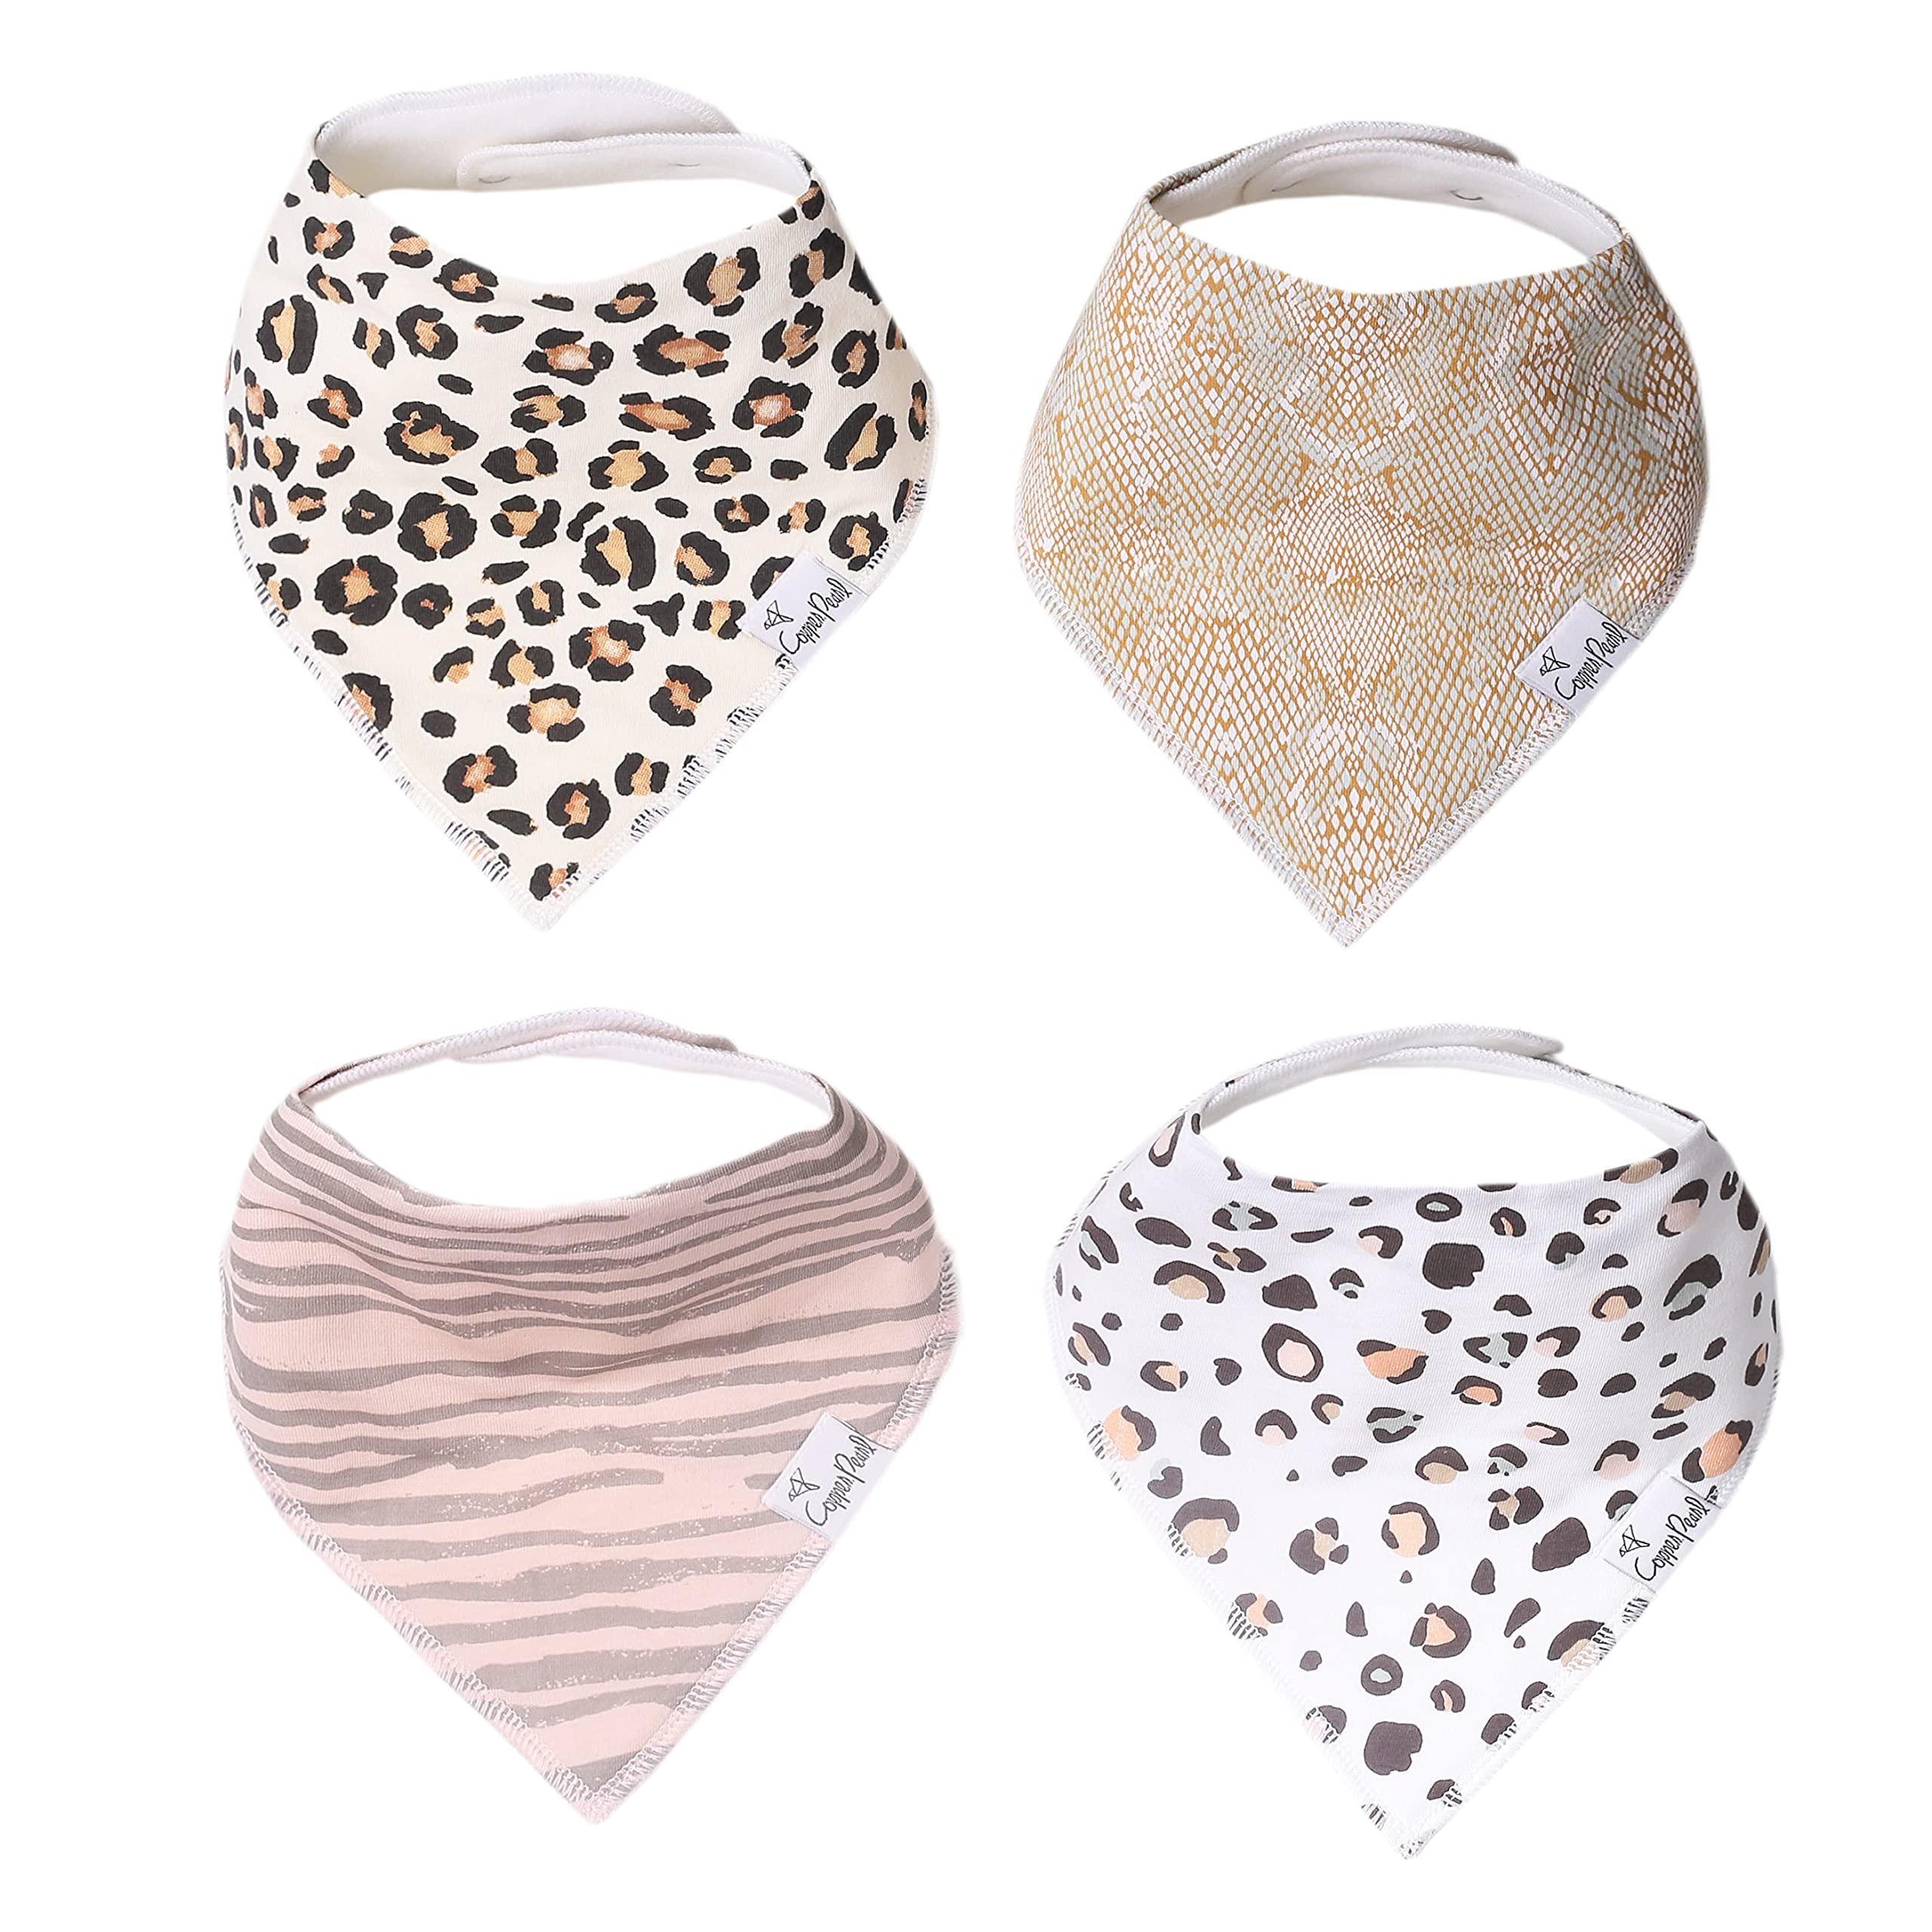 Baby Bandana Drool Bibs for Drooling and Teething 4 Pack Gift Set